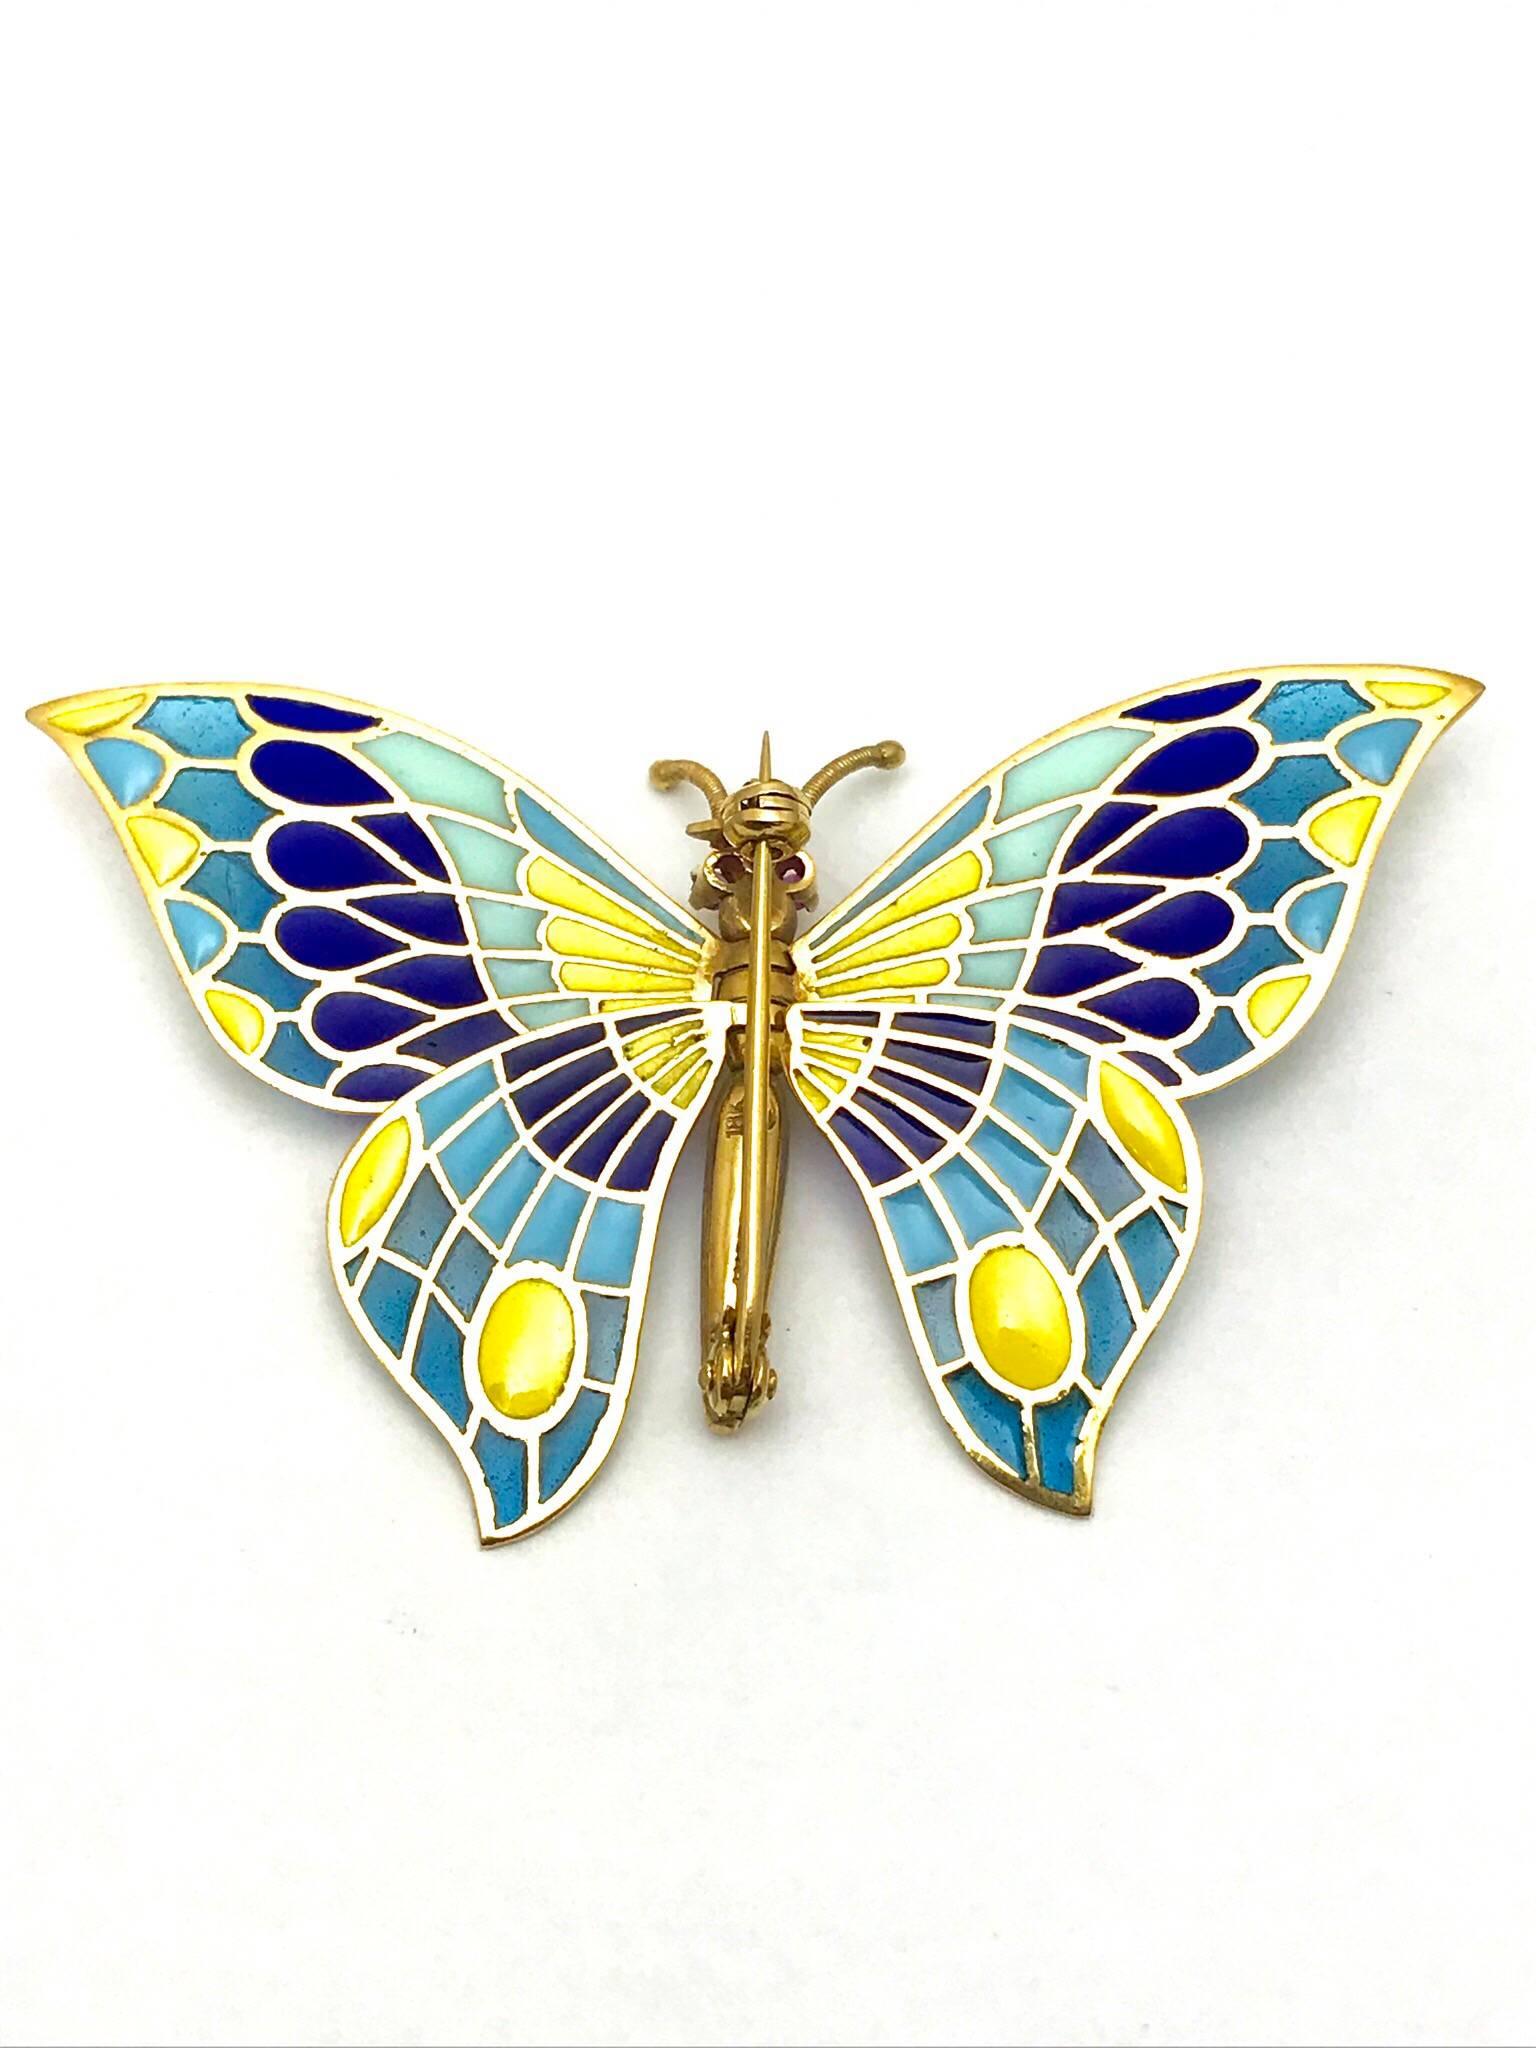 A plique a jour enamel and ruby eye 18 karat yellow gold butterfly brooch with articulating wings.  The butterfly features a textured gold body, with wings of  light blue, dark blue, and yellow colors.  The wings are able to fold all the way up, and